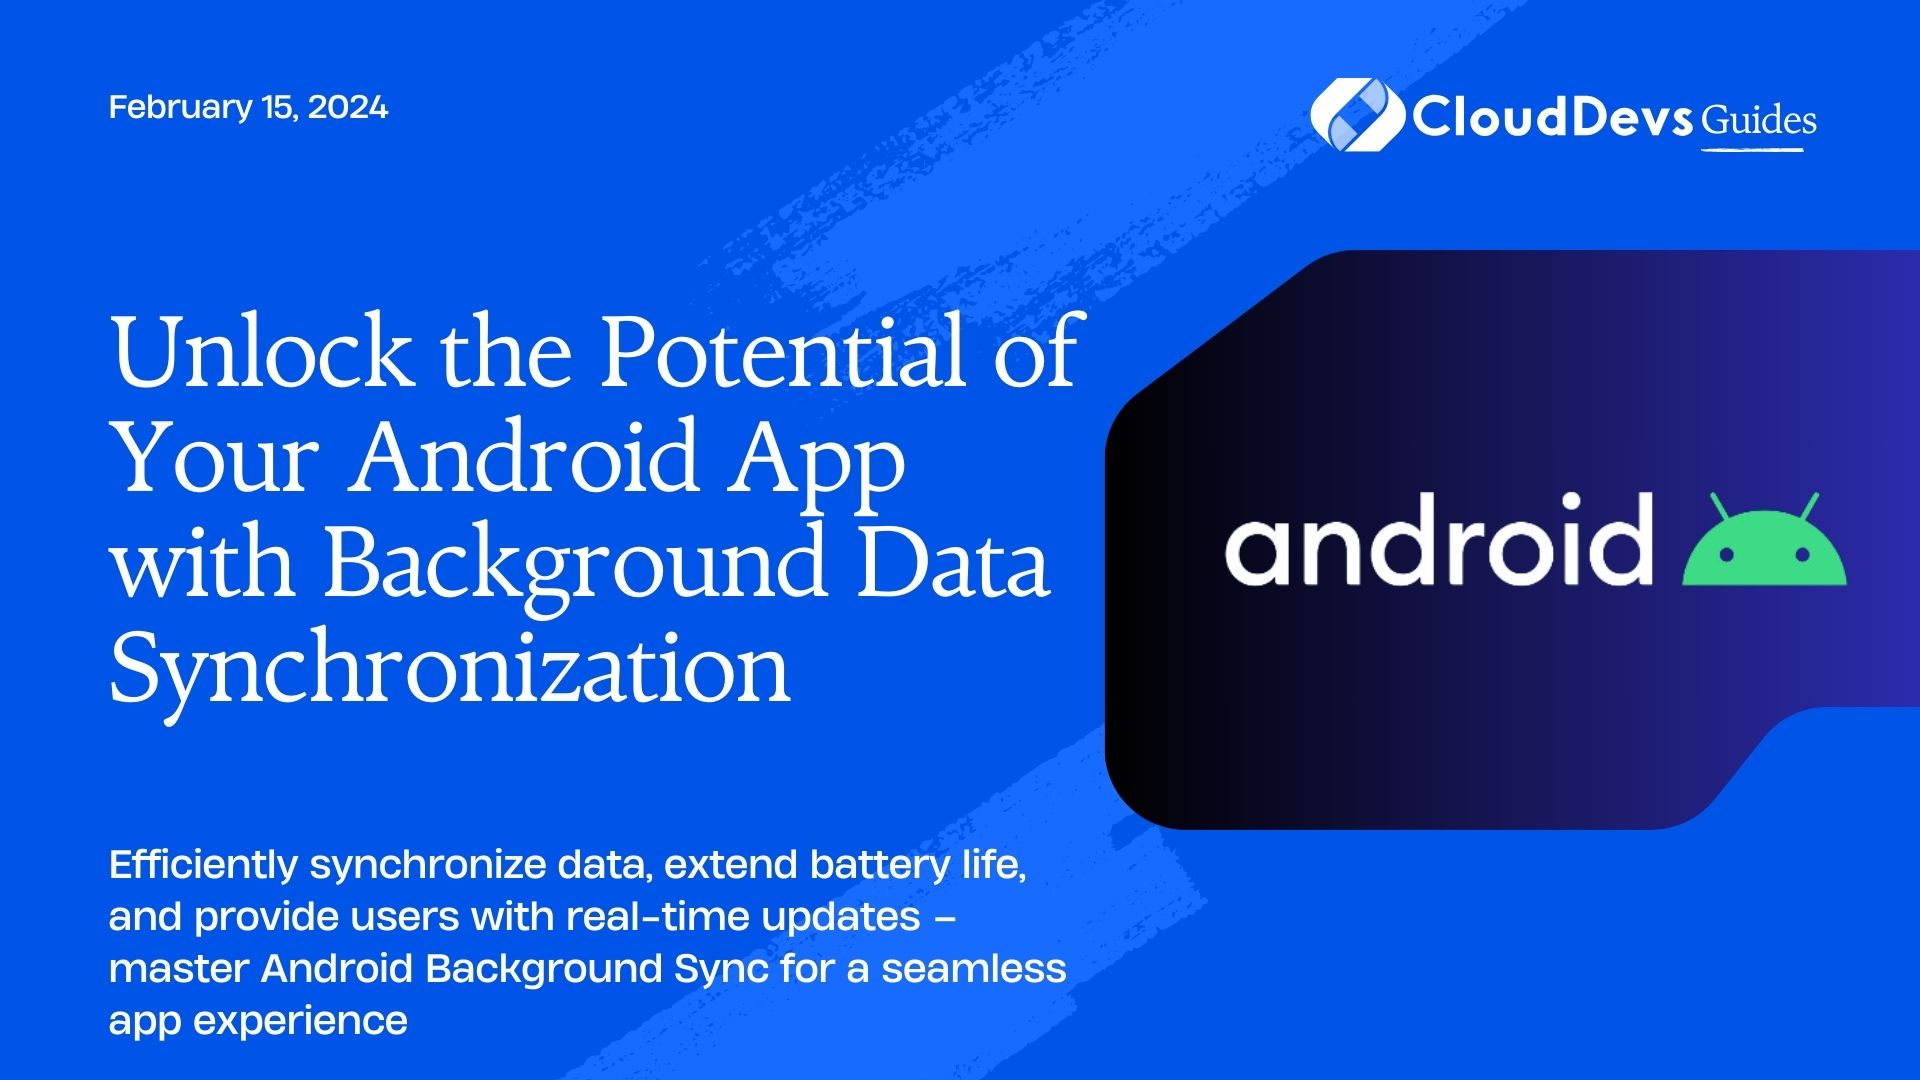 Android Background Sync: Synchronizing Data in the Background